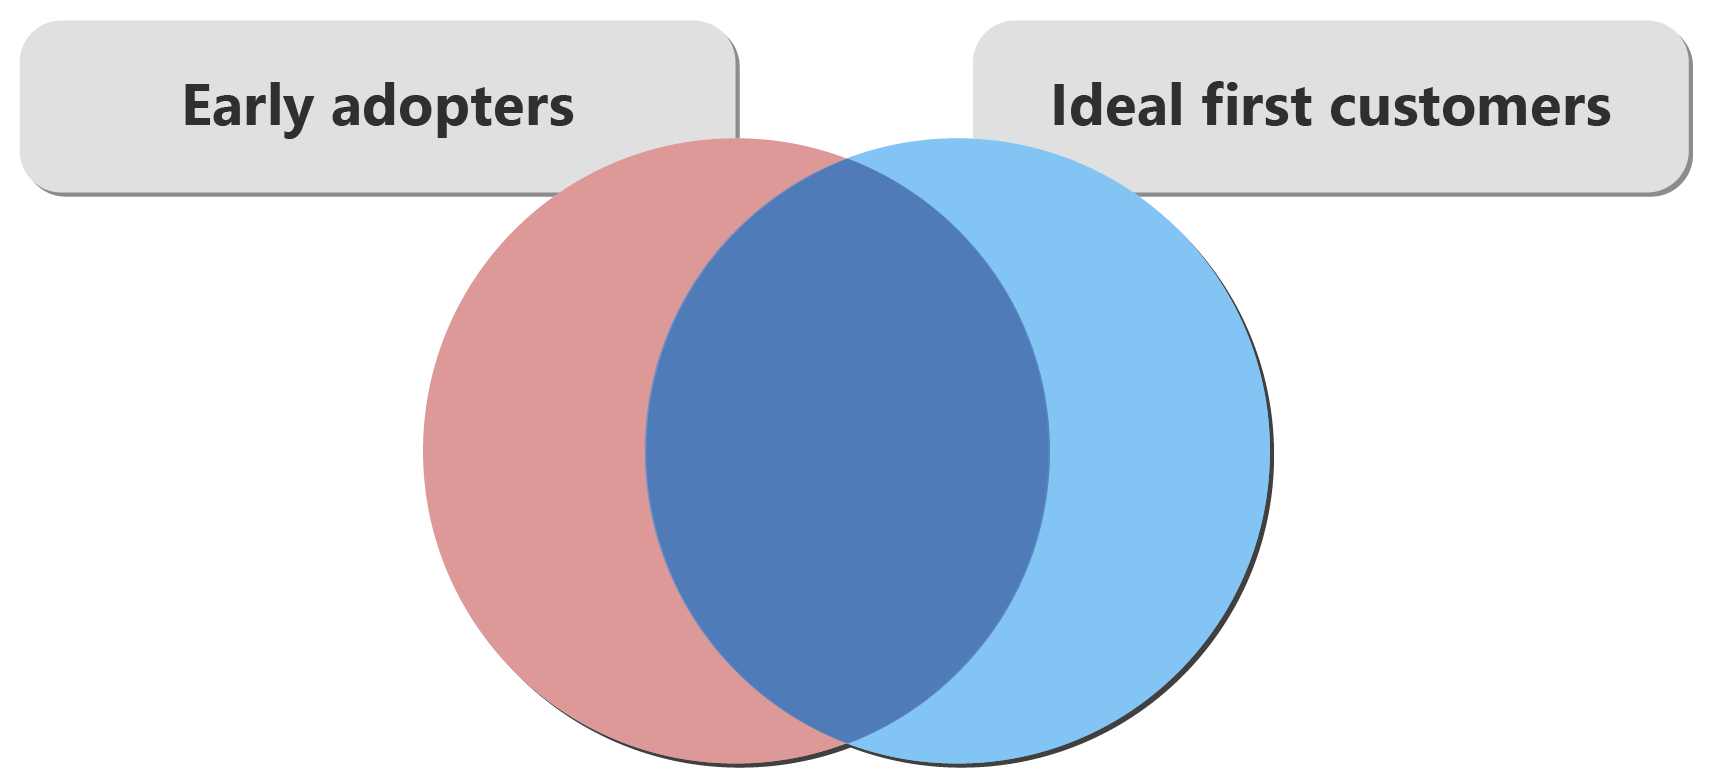 Venn diagram that shows two spheres. One is for early adopters and one is for ideal first customers. The spheres have significant overlap.